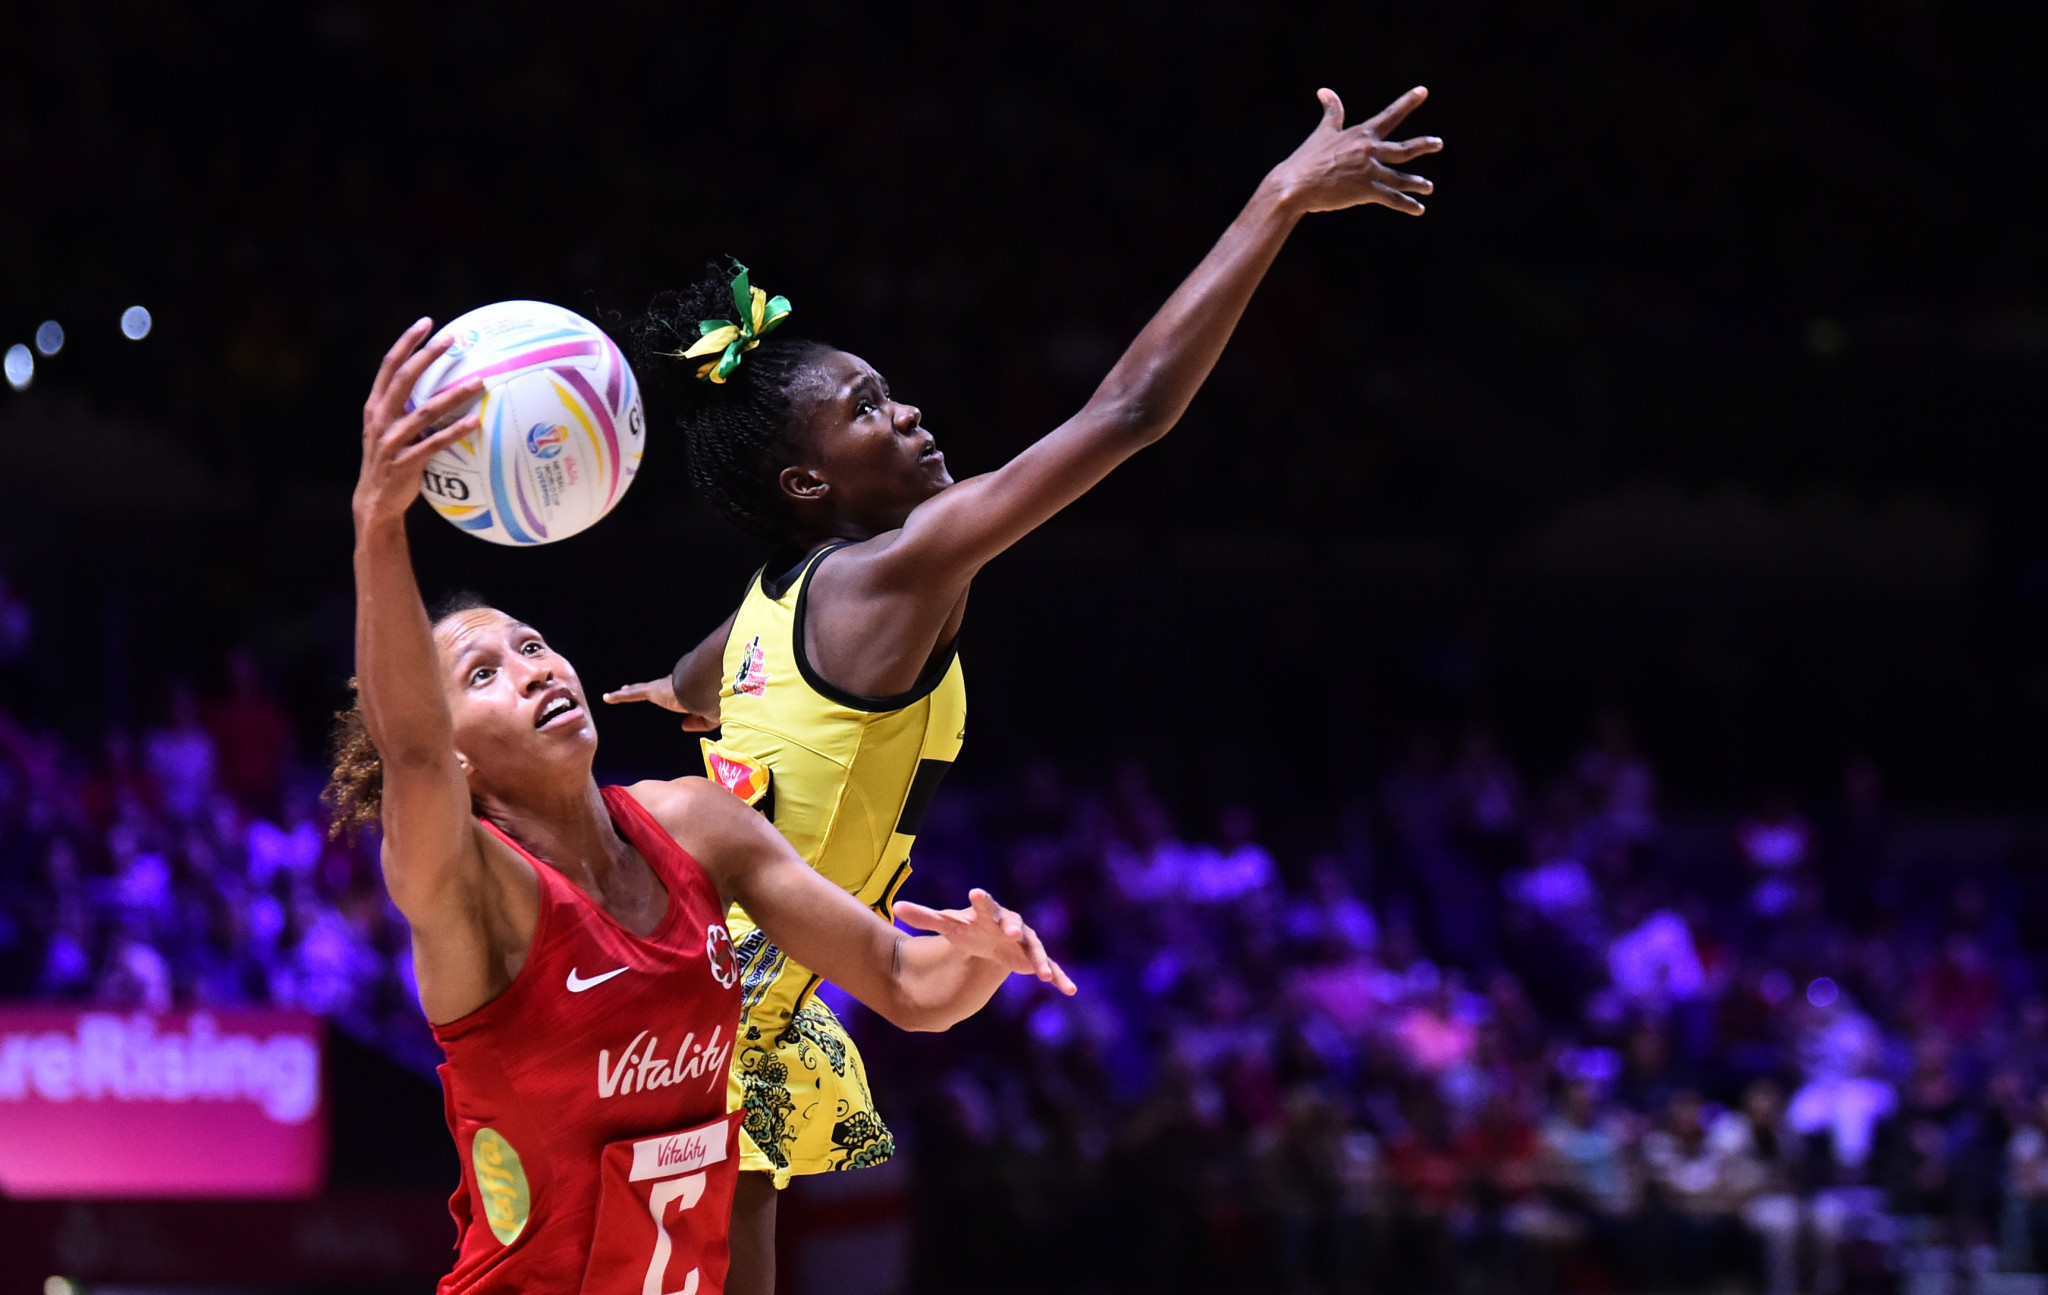 England inch closer to semi-final spot at Netball World Cup